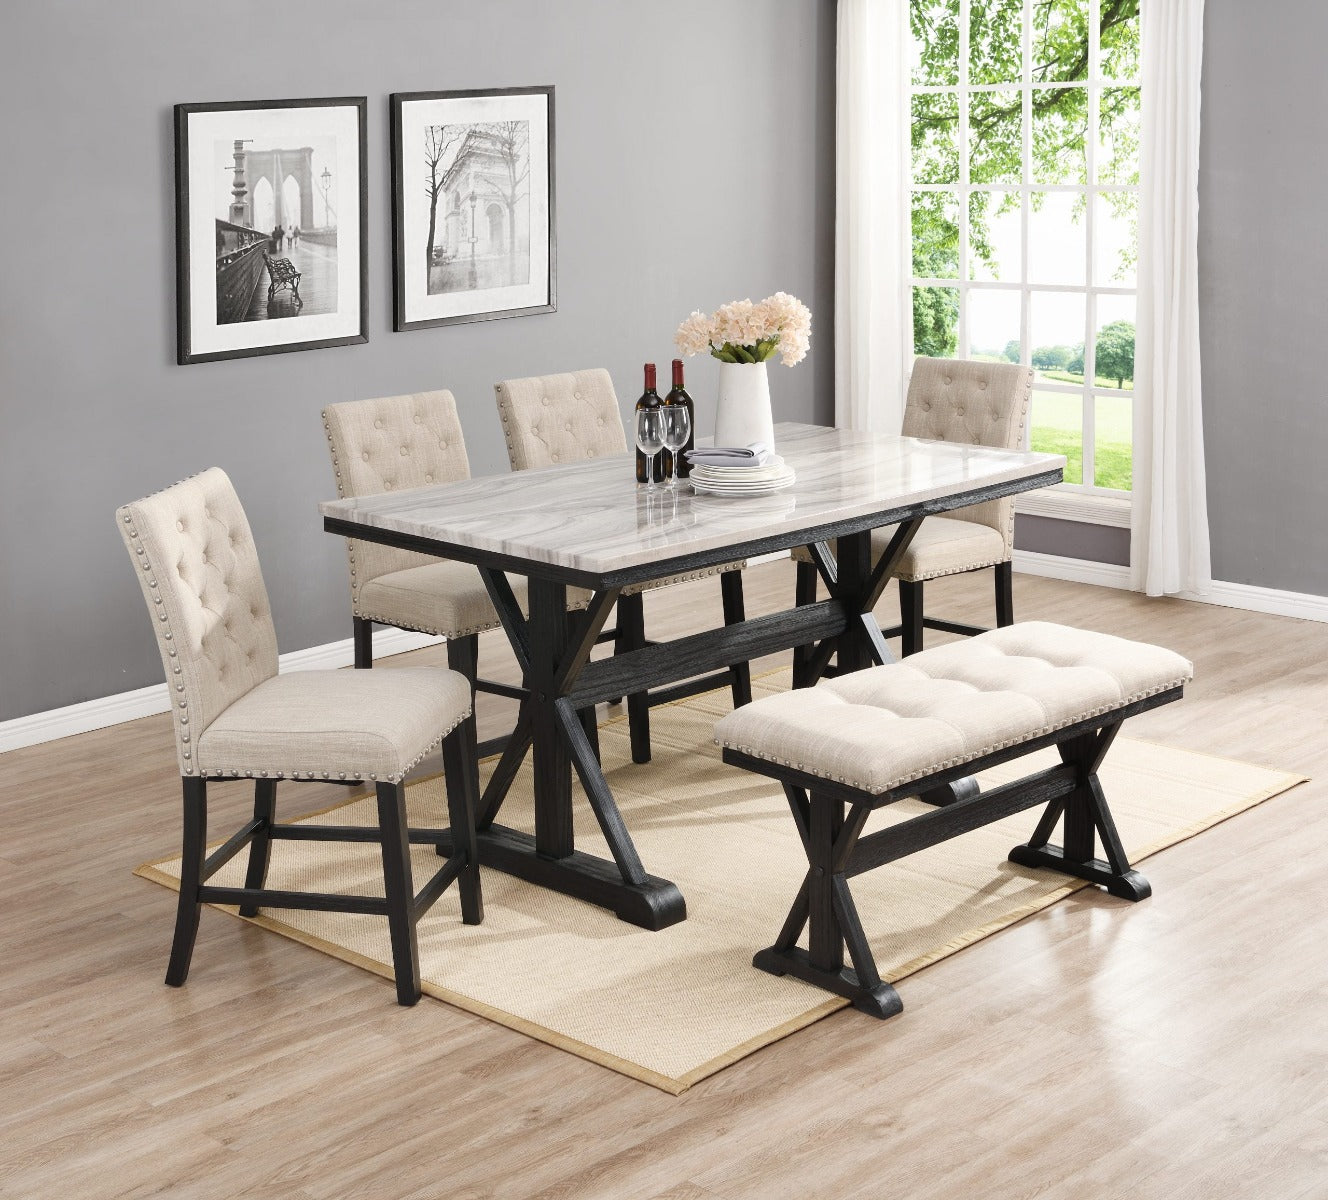 Chino 6 Pc Dining Set - Beige Linen Chairs